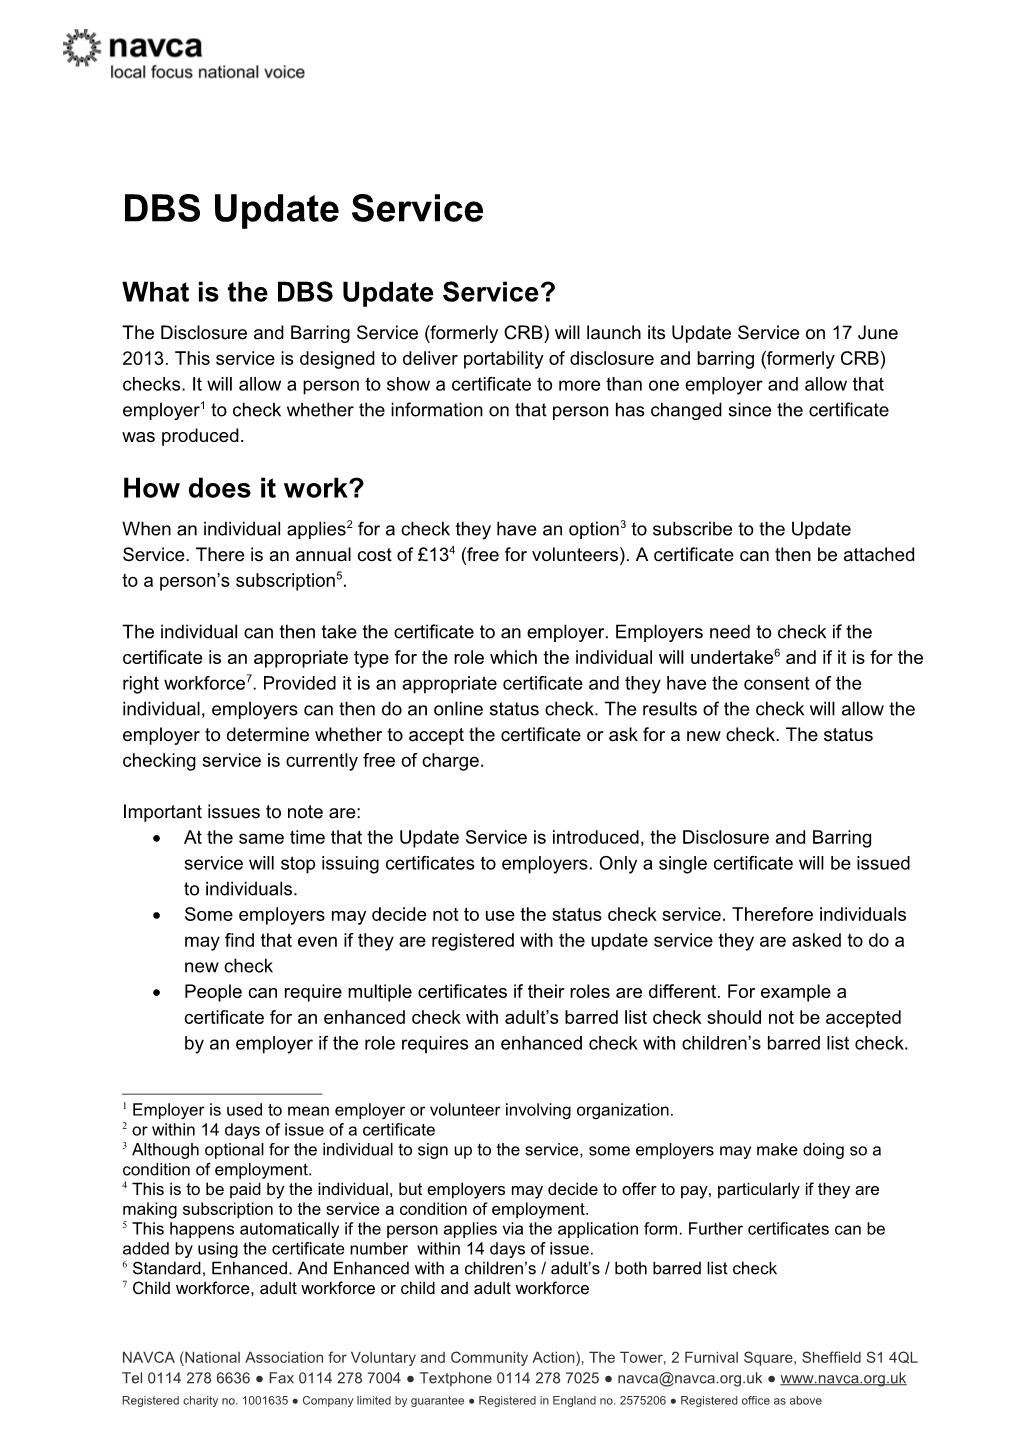 What Is the DBS Update Service?